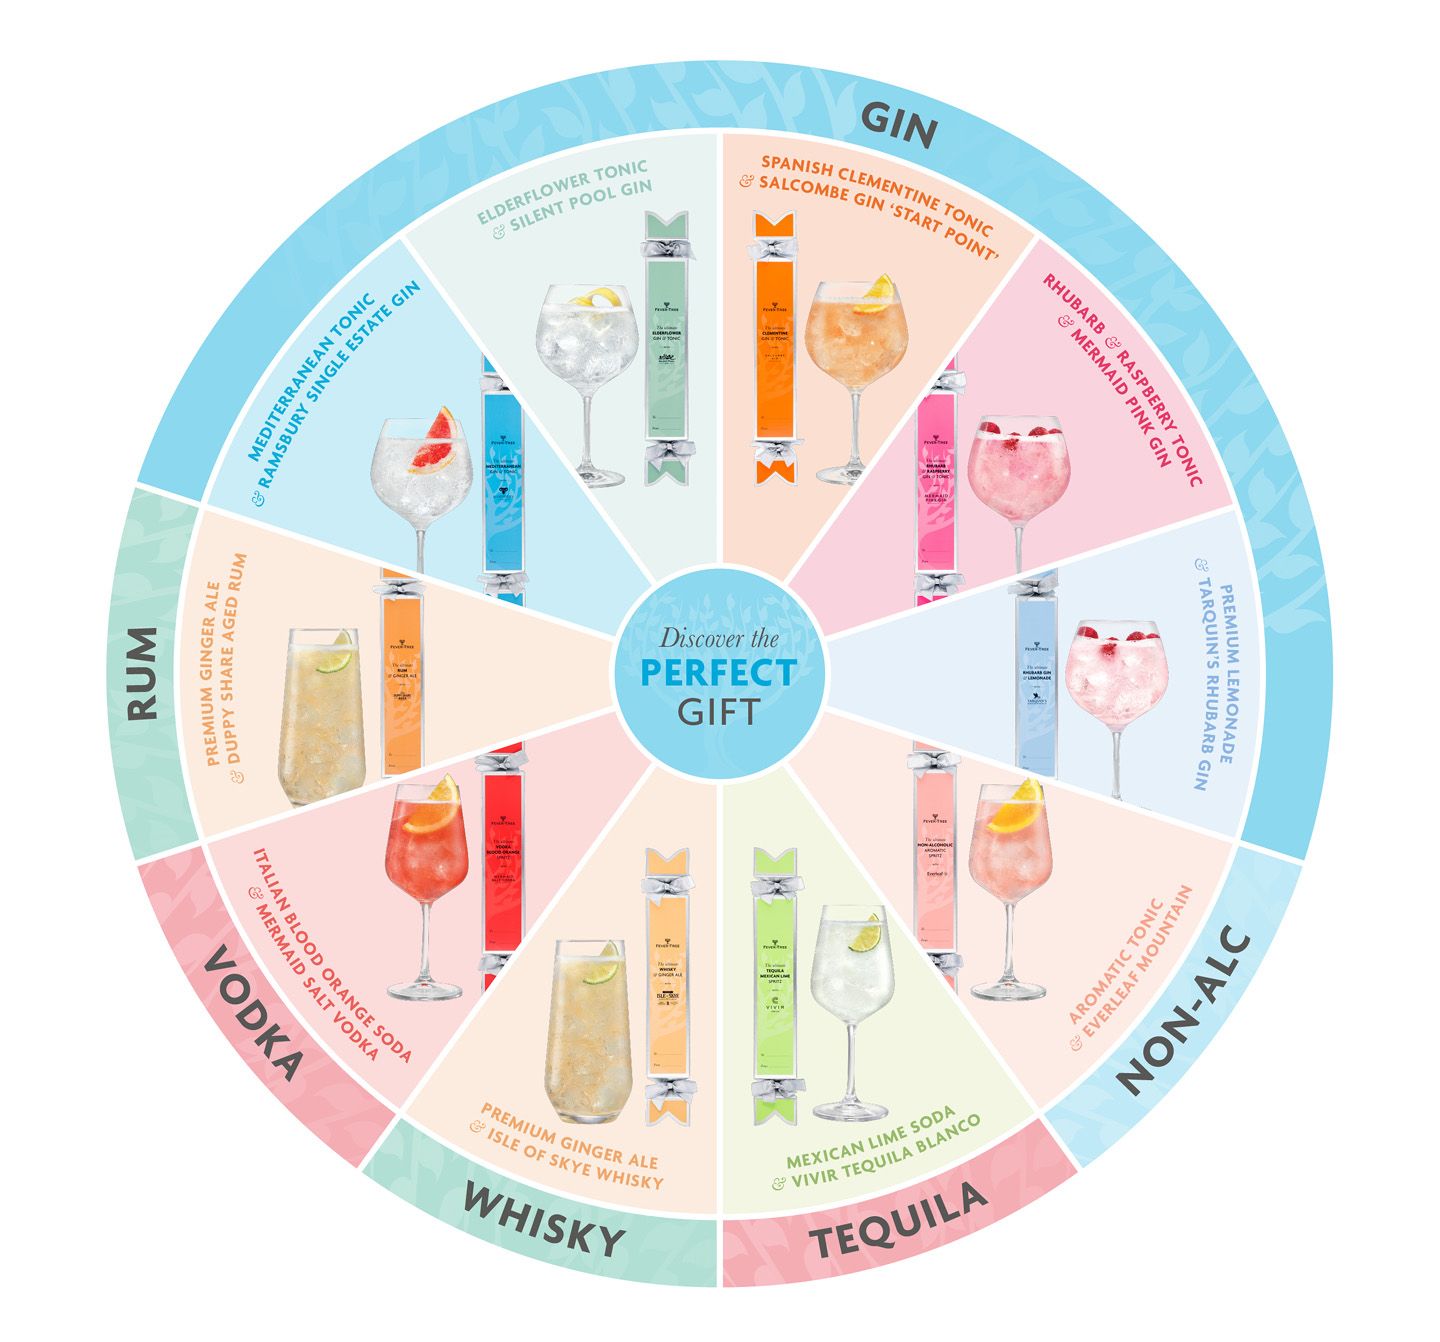 Image of a wheel with fever tree information